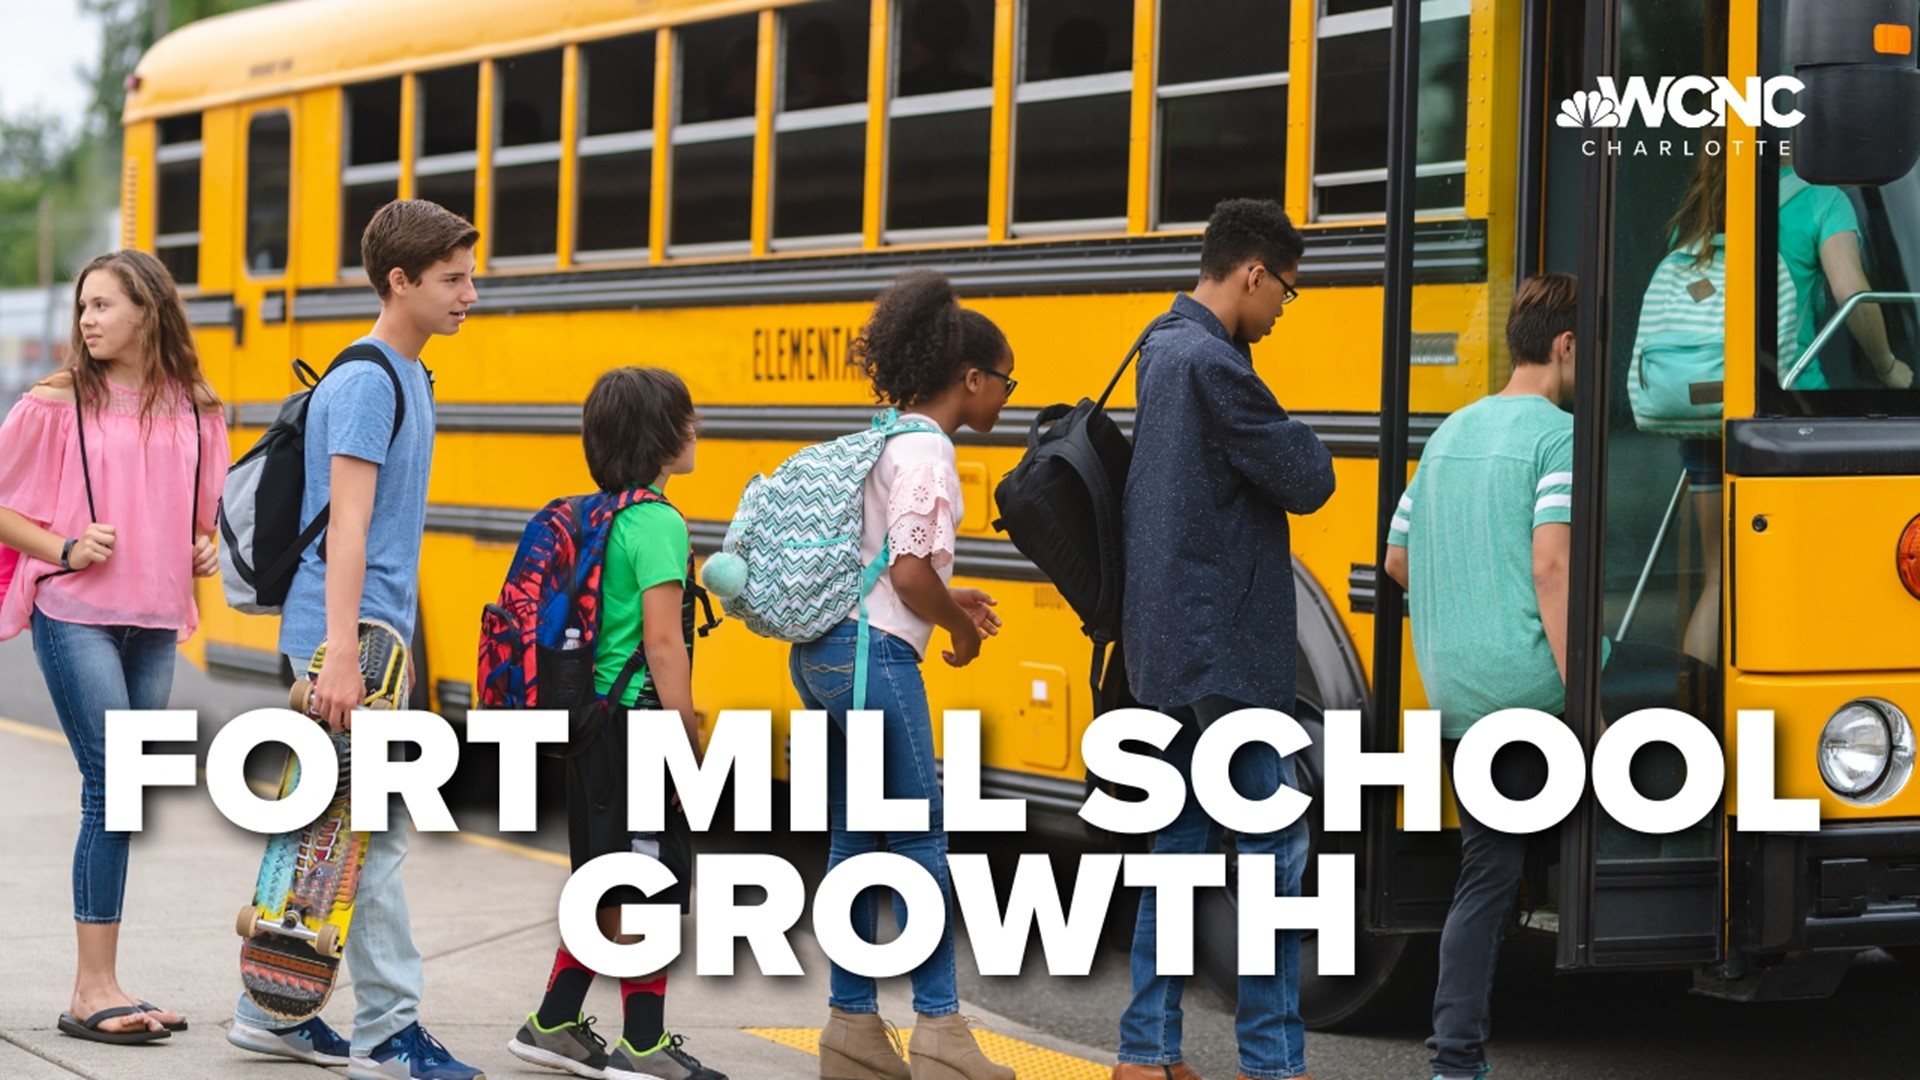 Fort mills schools are moving some students away from their neighborhood school because many are overcrowded.